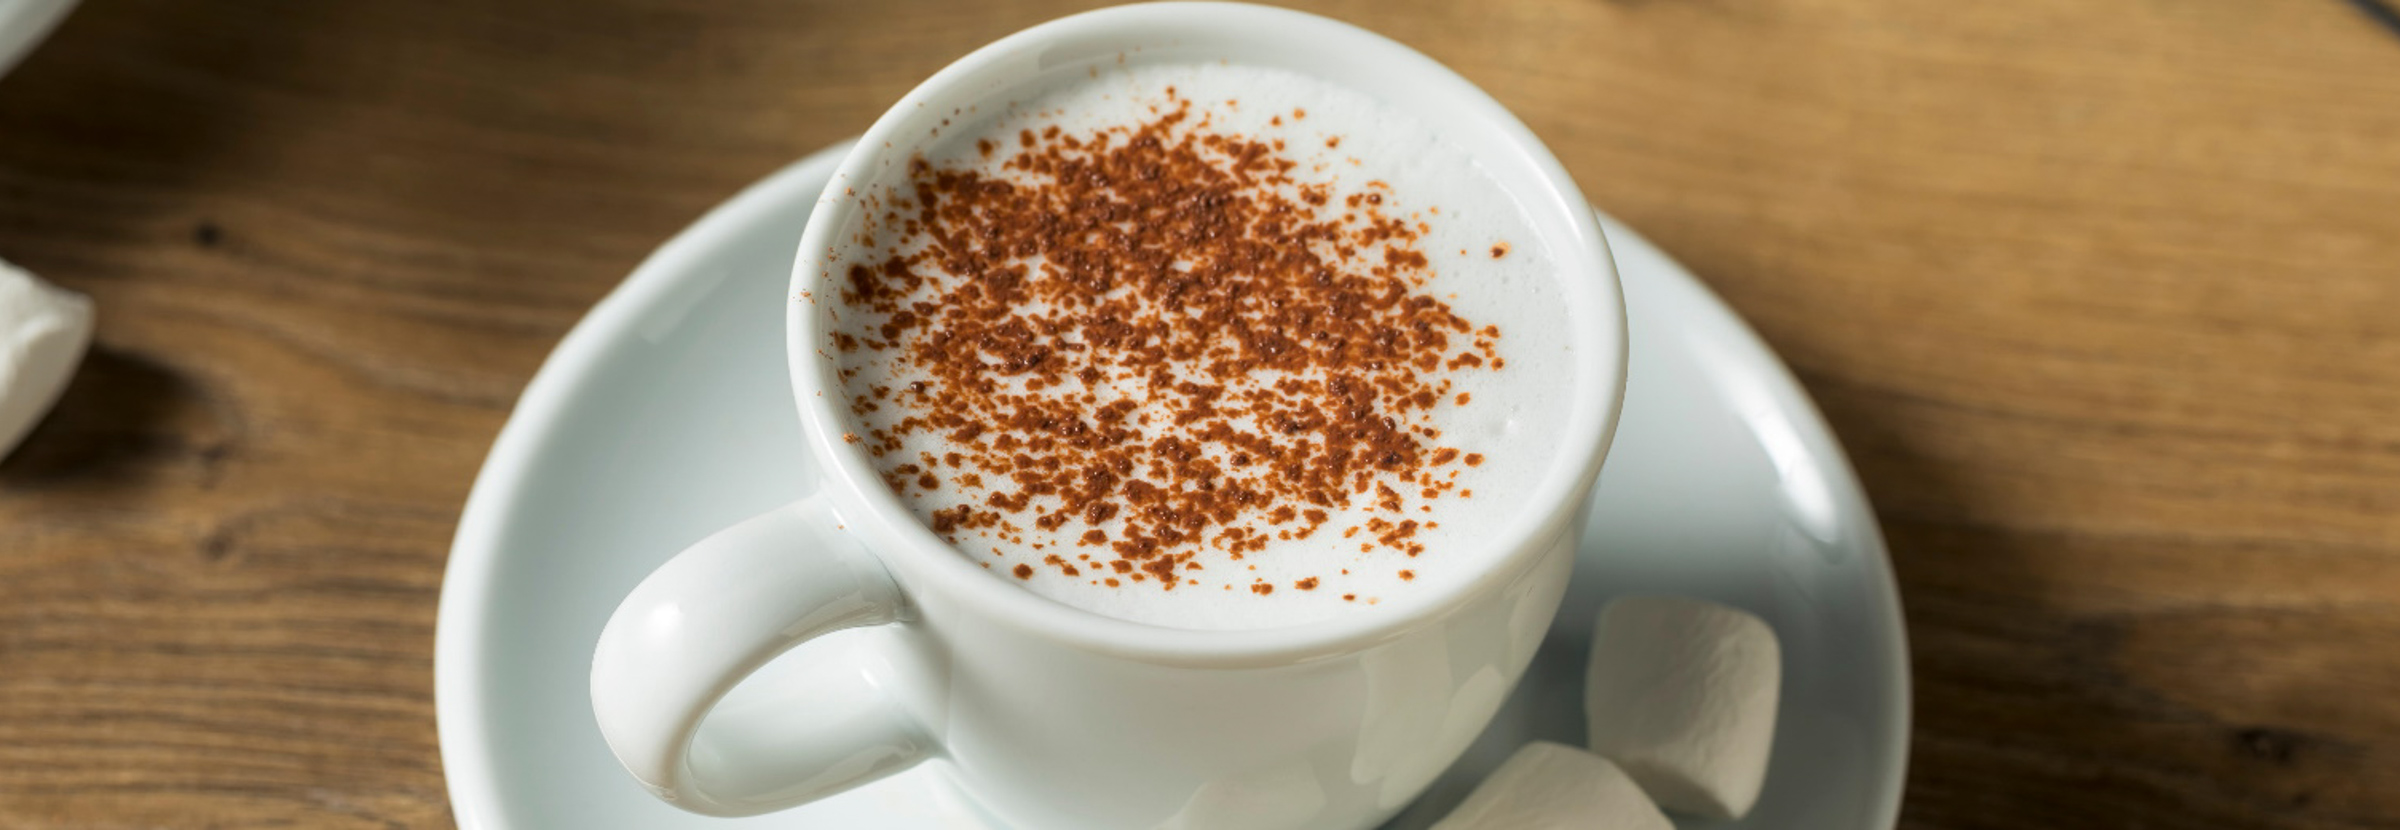 a babyccino sprinkled with chocolate powder